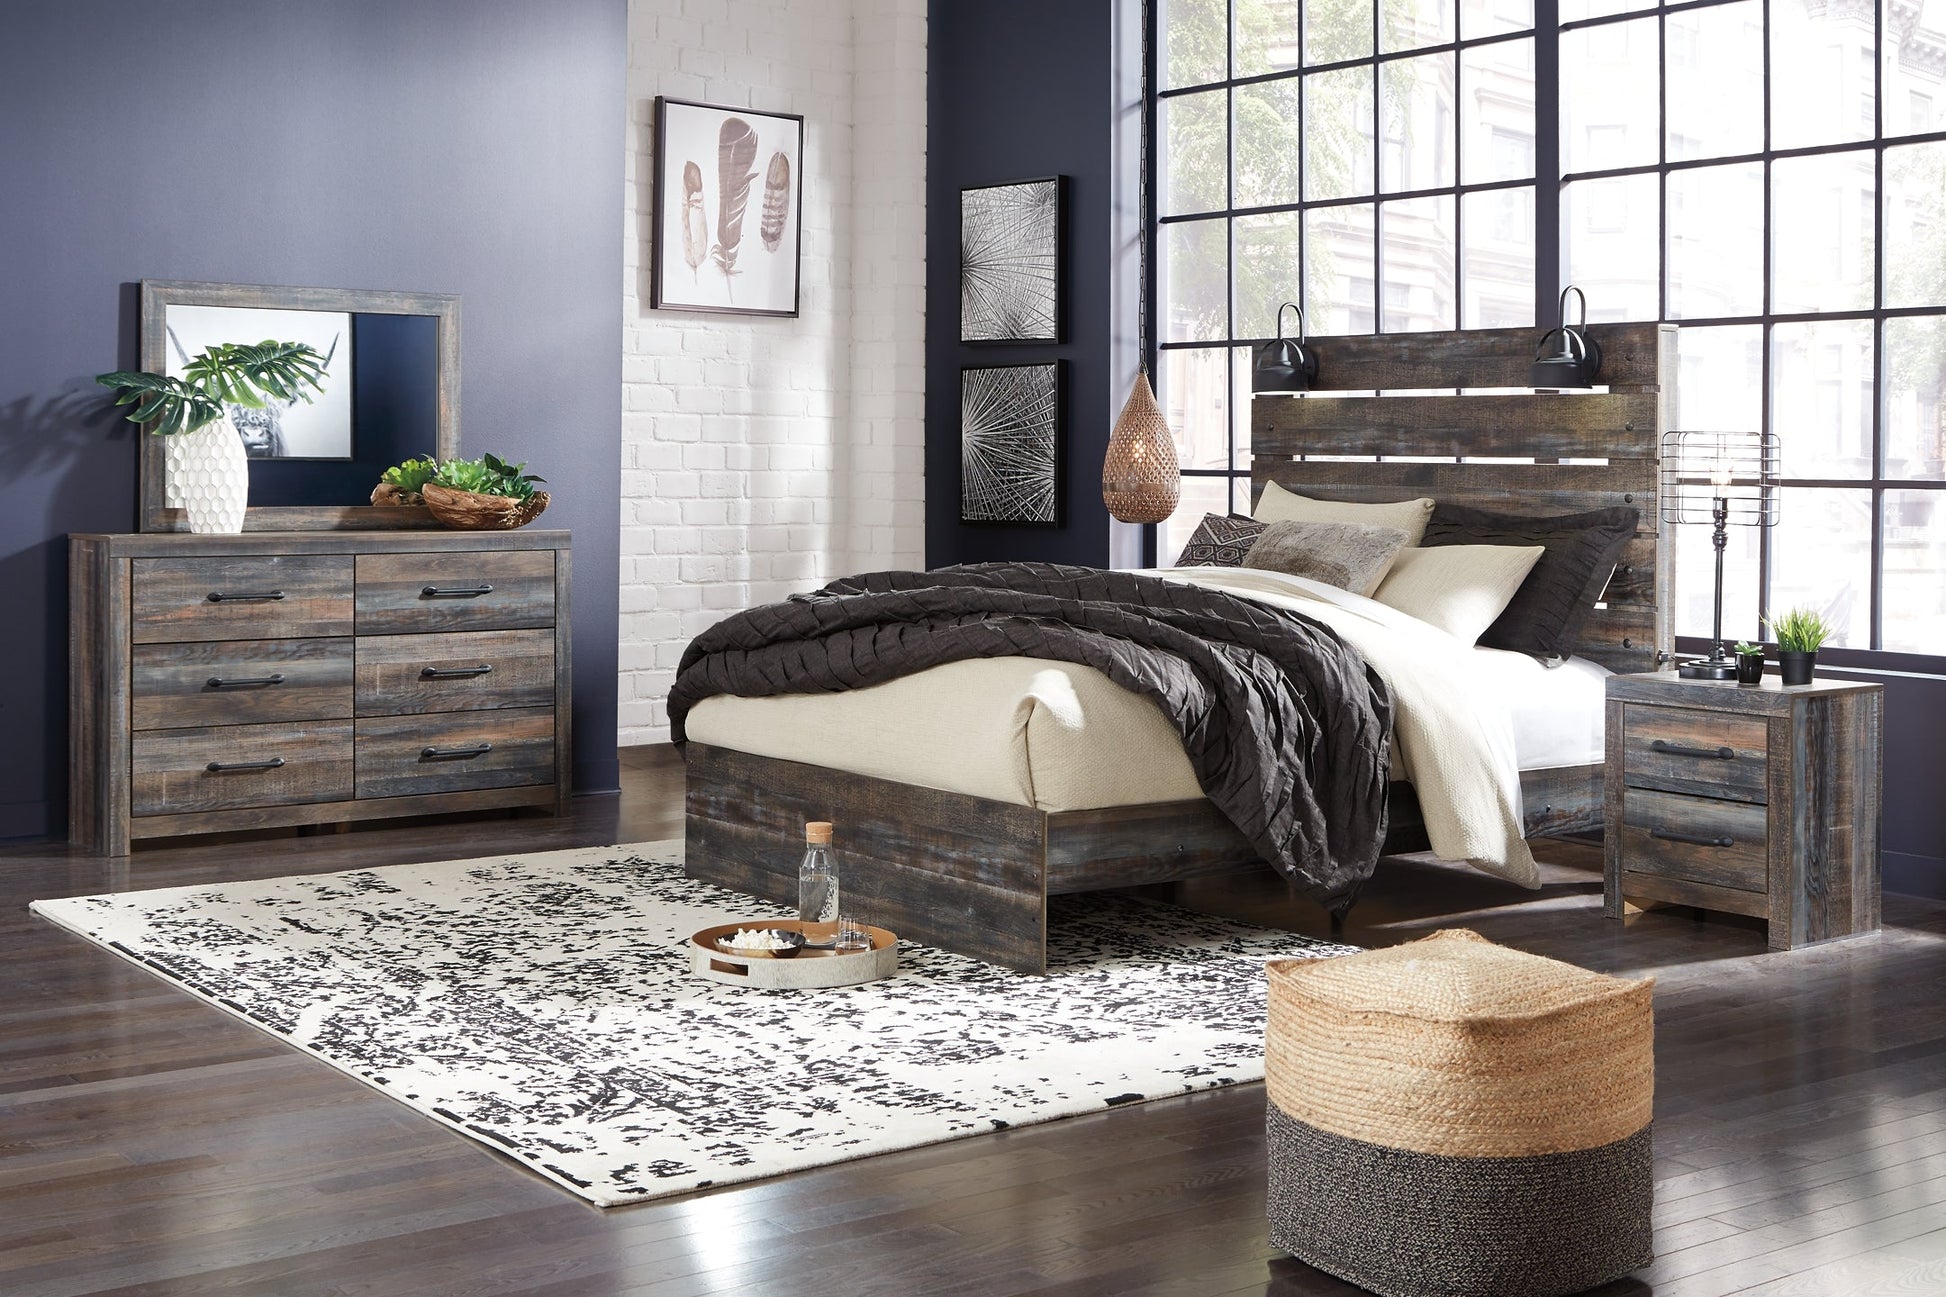 Drystan Queen Panel Bed with Mirrored Dresser, Chest and 2 Nightstands Smyrna Furniture Outlet